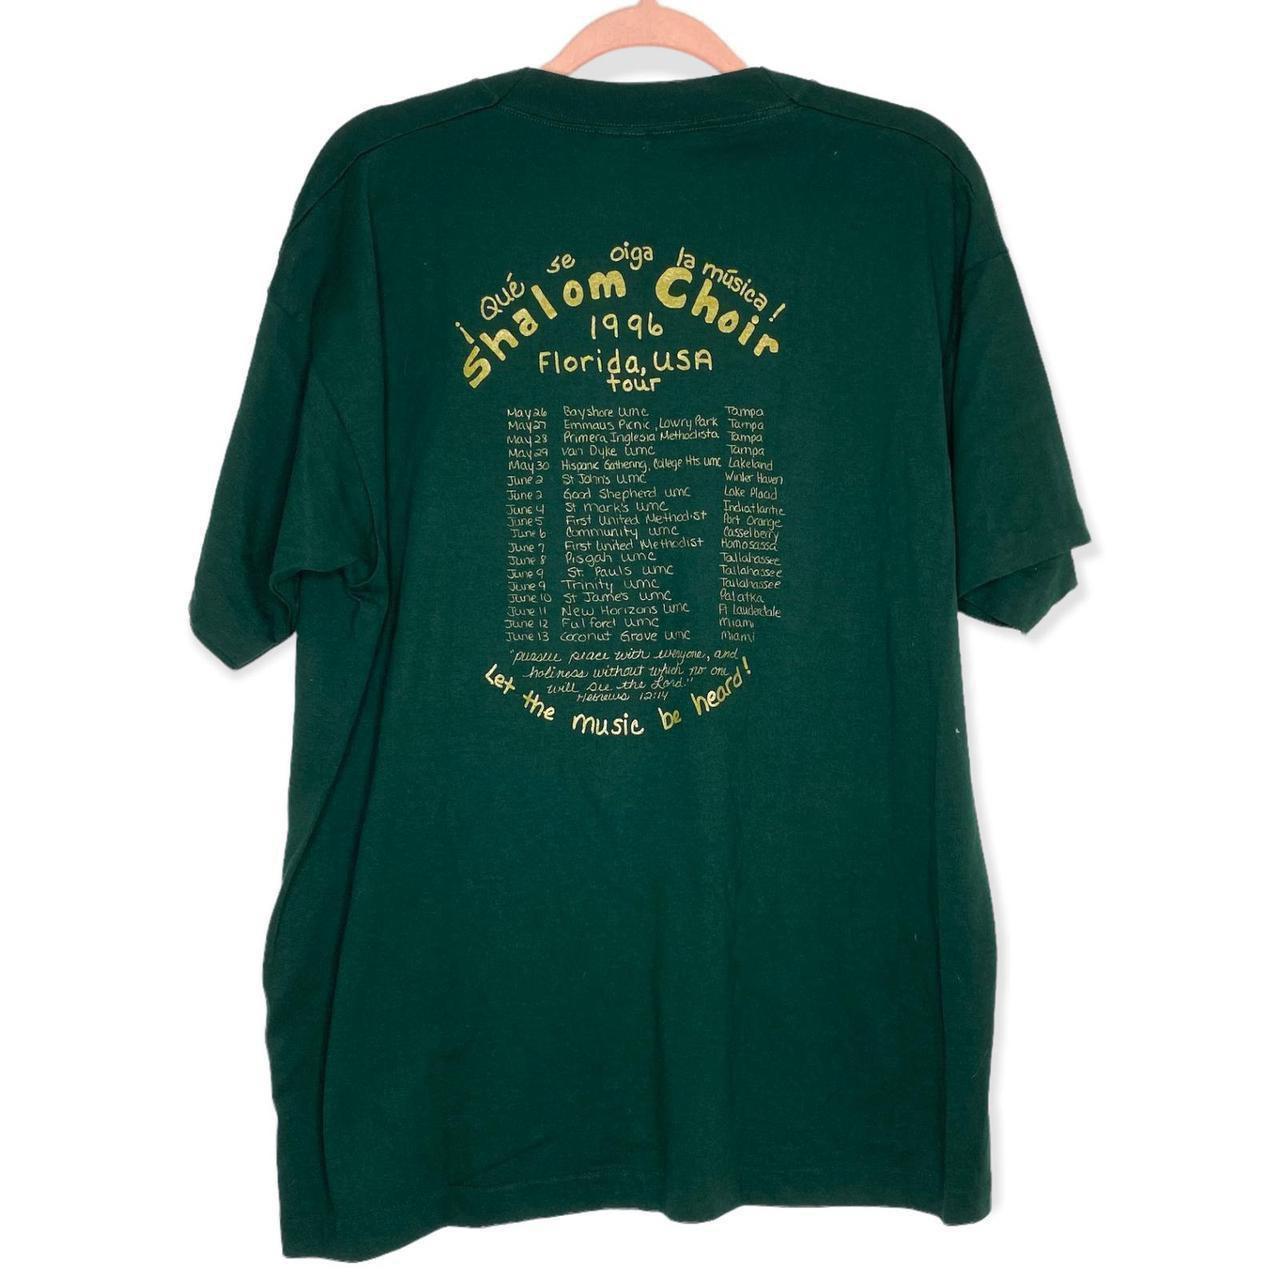 Product Image 2 - Vintage dark green tee featuring